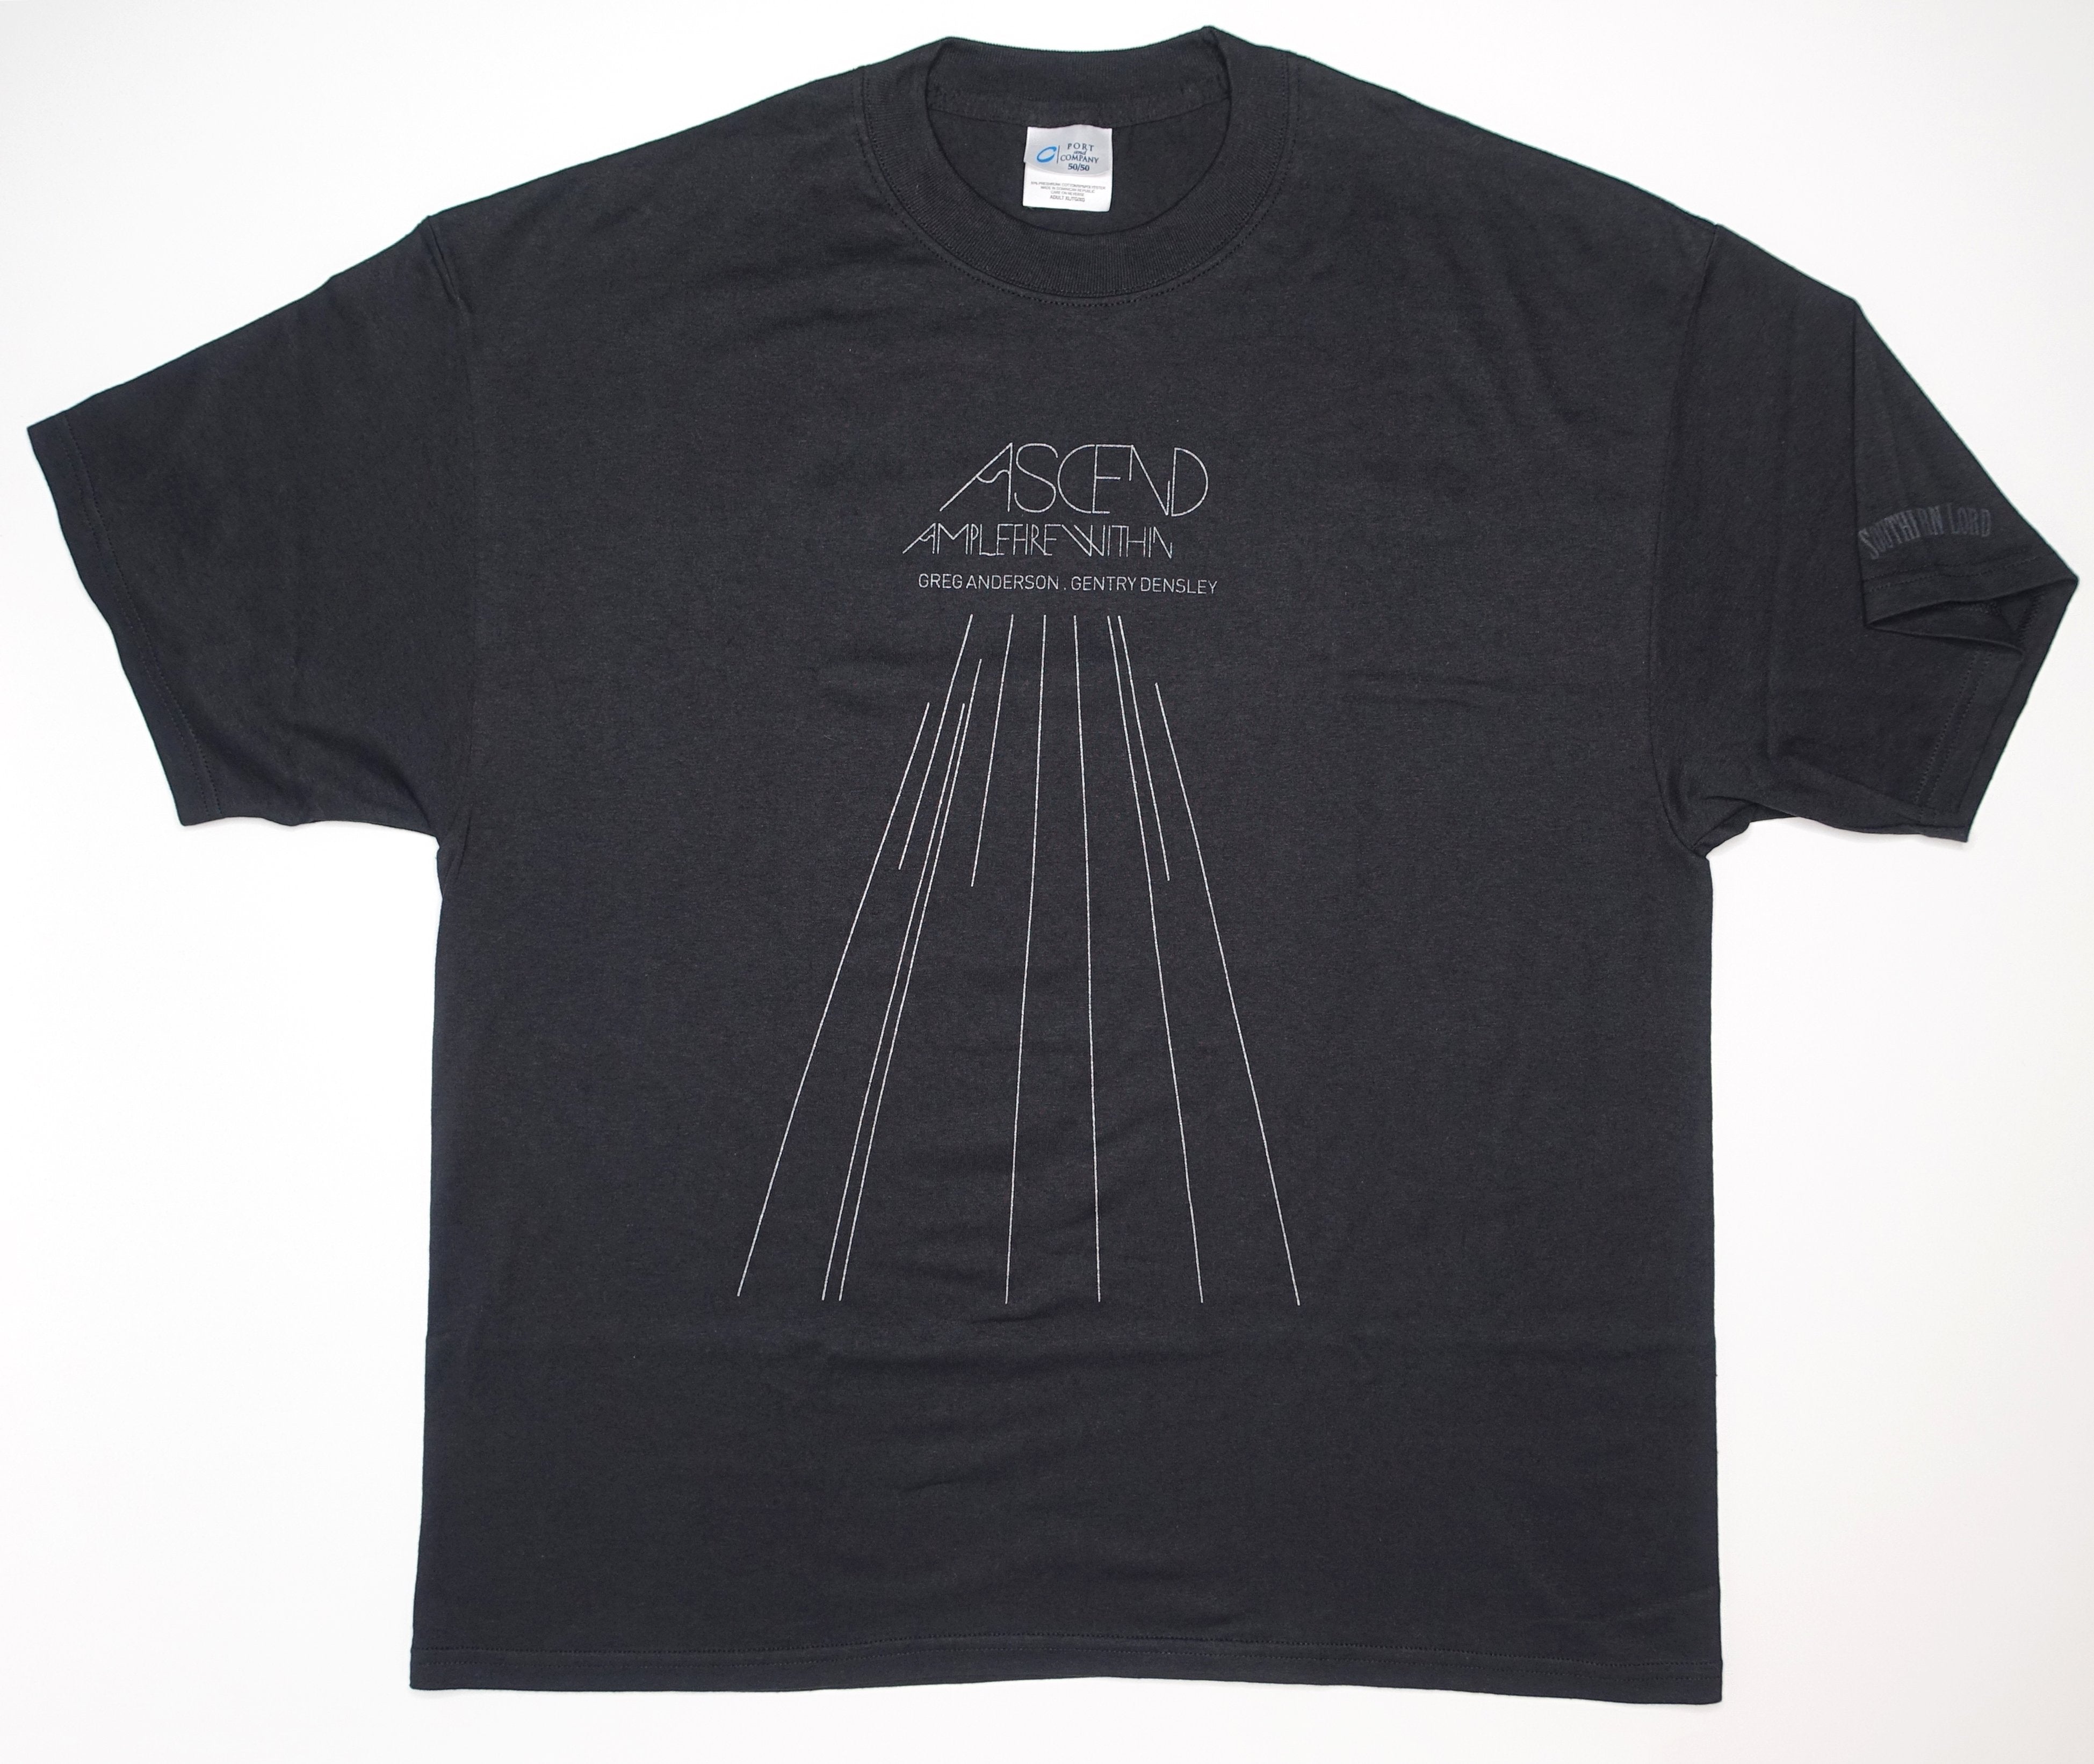 Ascend ‎– Ample Fire Within 2008 Tour Shirt Size XL